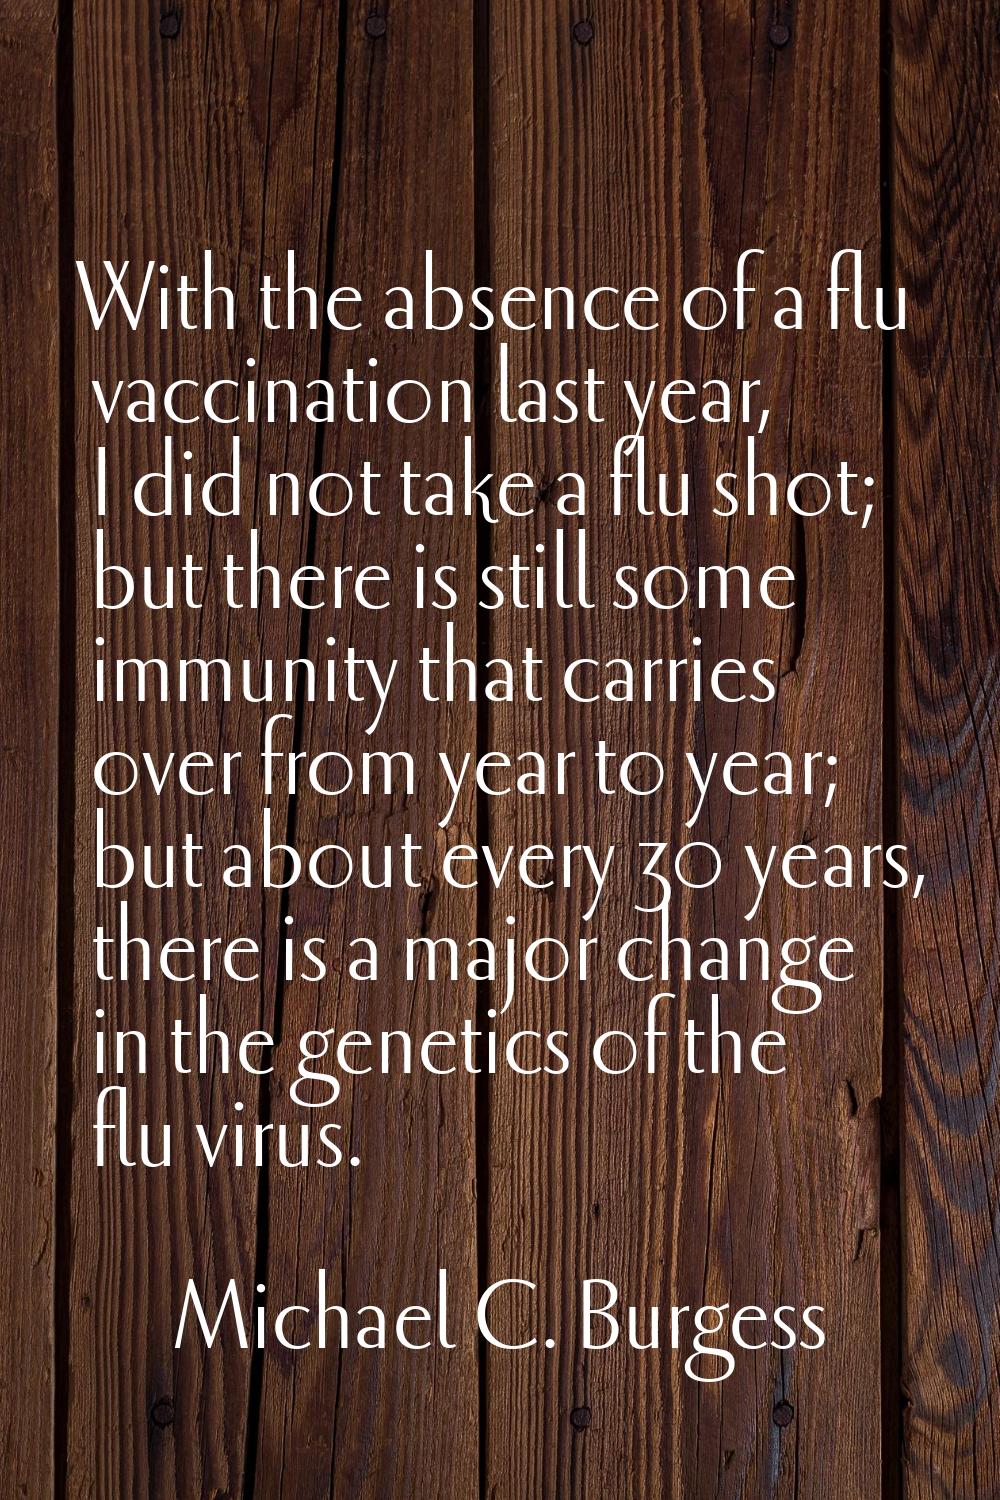 With the absence of a flu vaccination last year, I did not take a flu shot; but there is still some